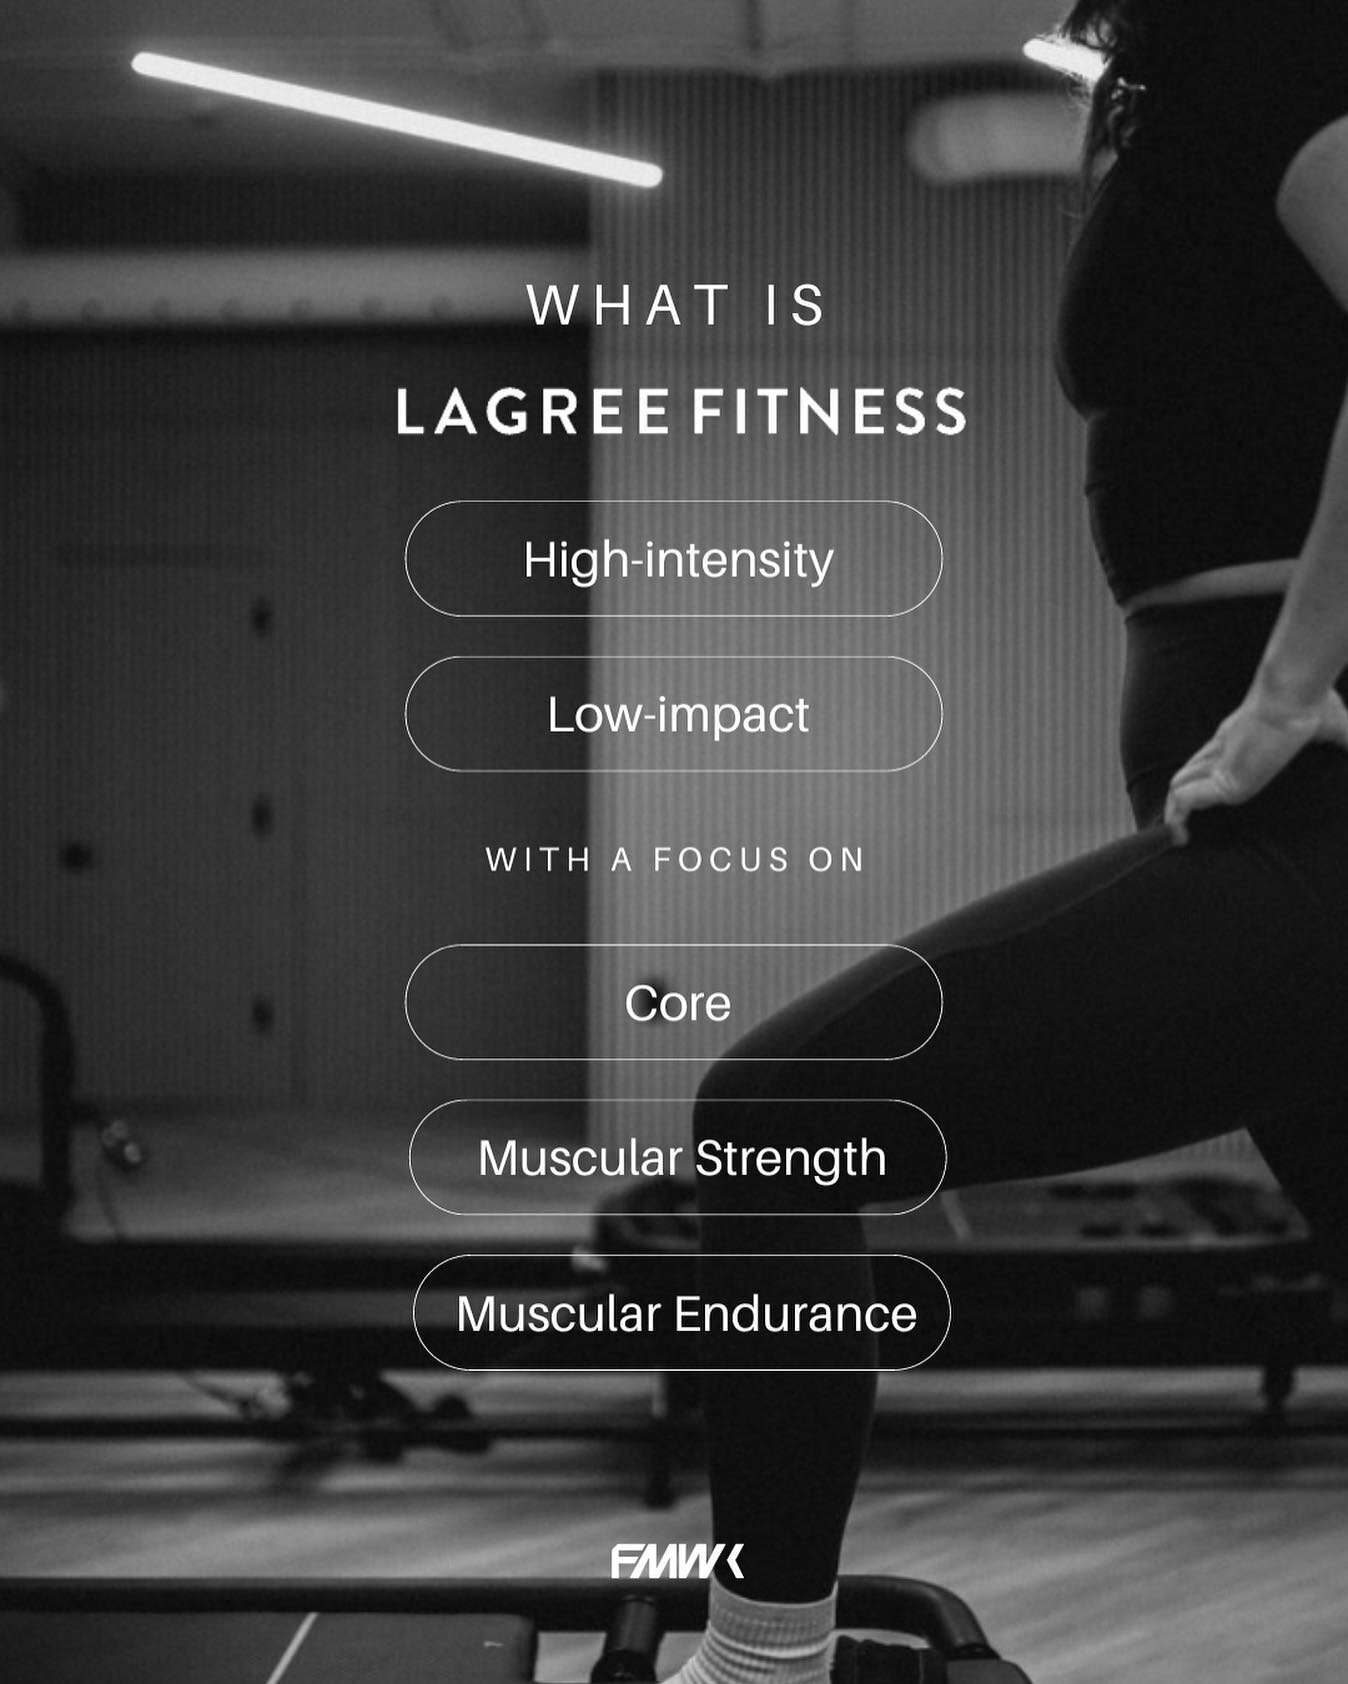 By incorporating the key principles of core stability and blending them with fusion of muscle dynamics, Lagree has created the next evolution of physical fitness. 

The Lagree Method tightens, strengthens, and tones the body by incorporating bodybuil